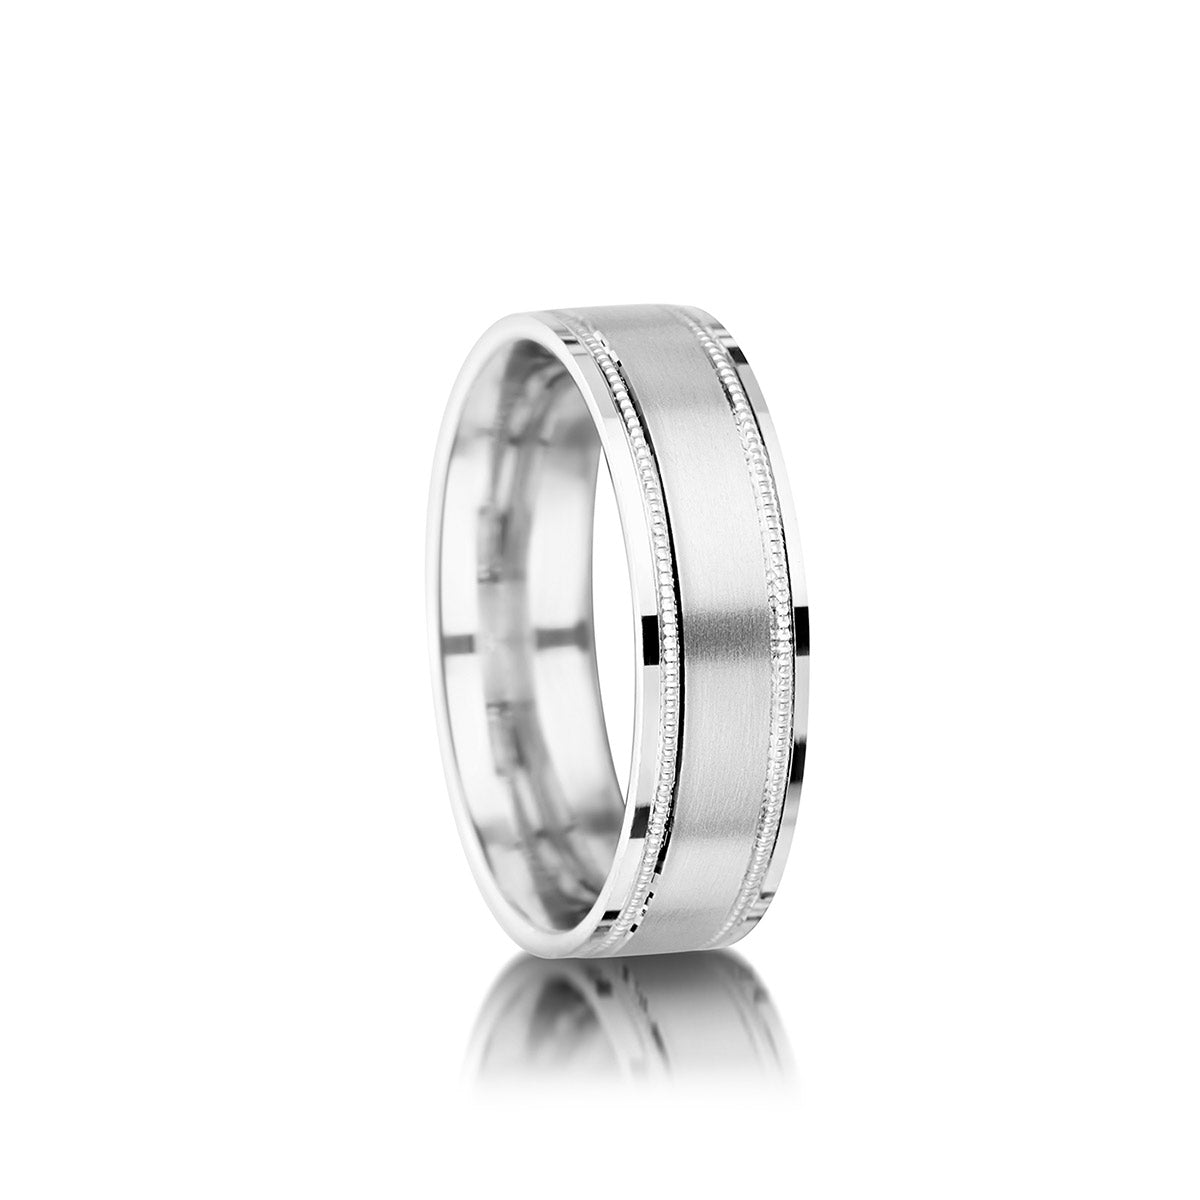 Mens Wedding Ring With Double Mil Grain Grooves – MWR24